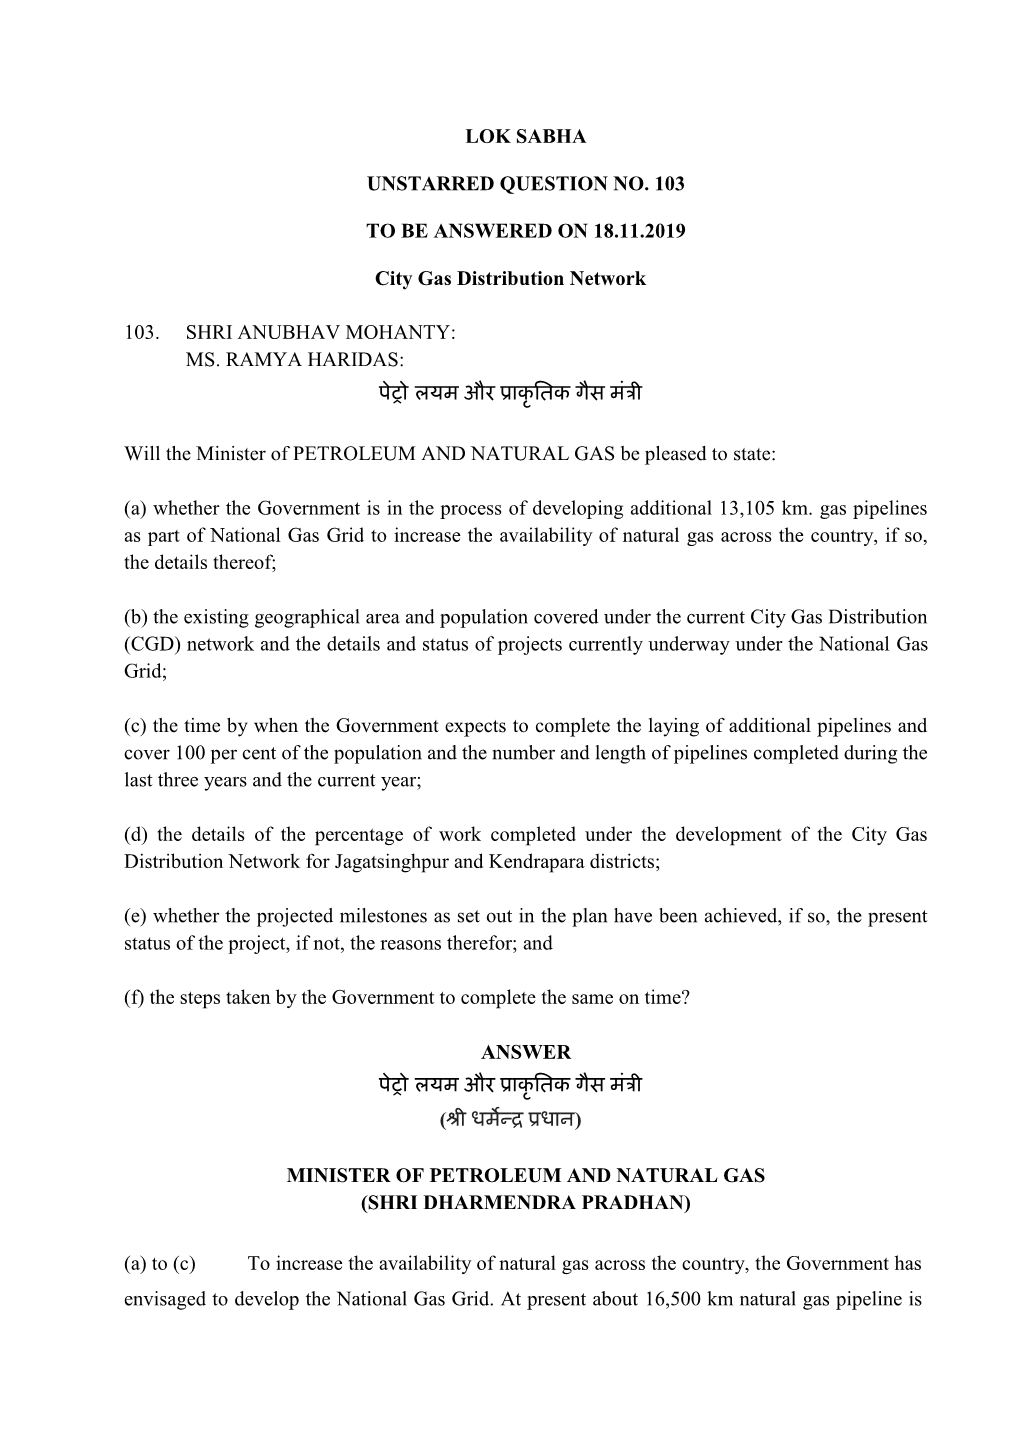 Lok Sabha Unstarred Question No. 103 to Be Answered on 18.11.2019 Regarding City Gas Distribution Network